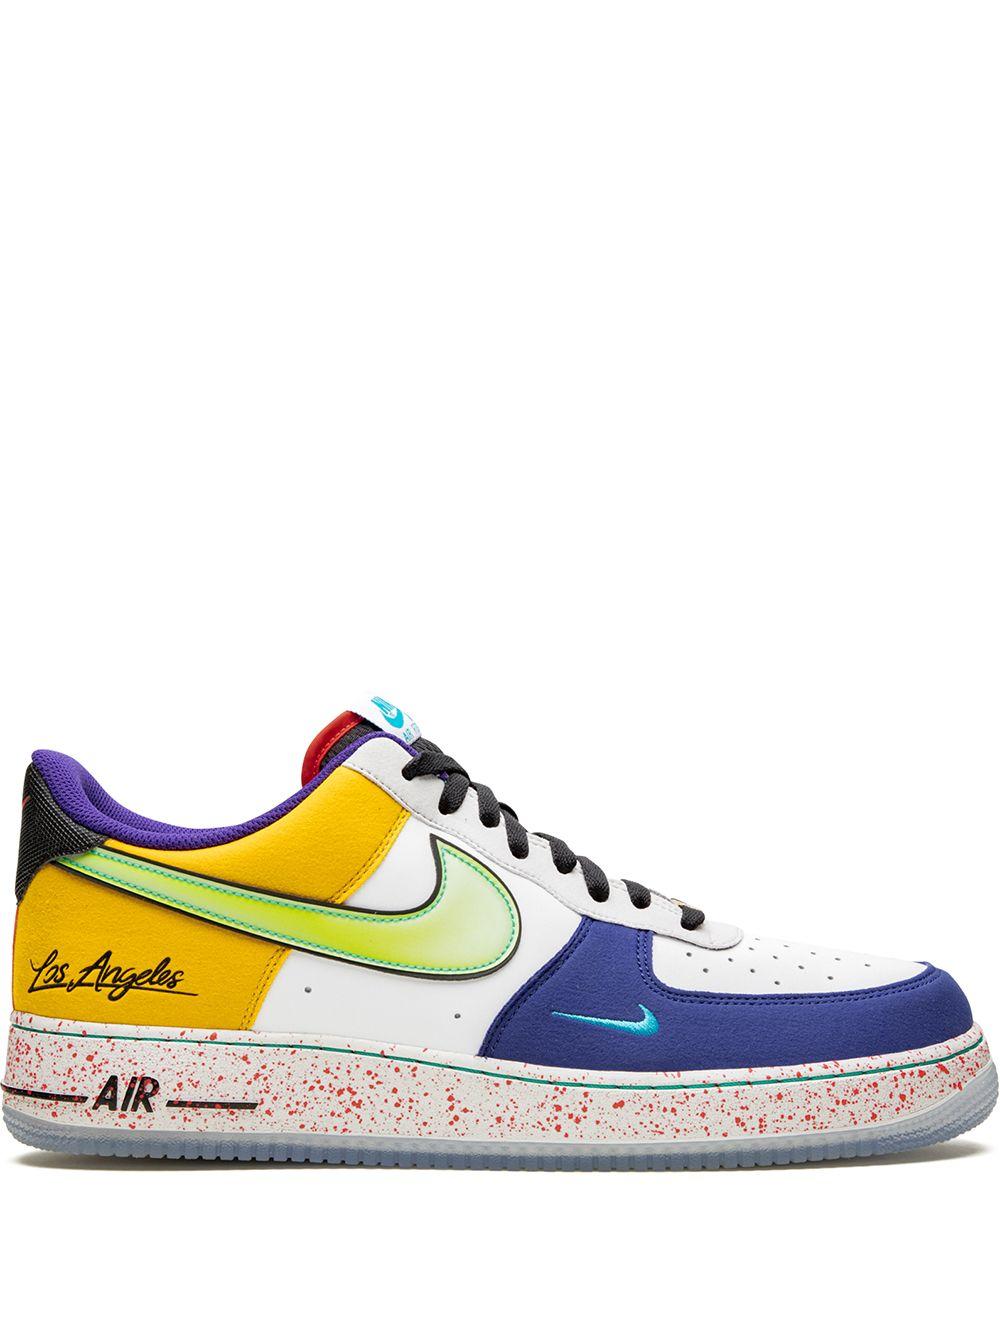 Nike Leather Air Force 1 07 Lv8 'what The La' Sneakers in Blue for Men -  Lyst